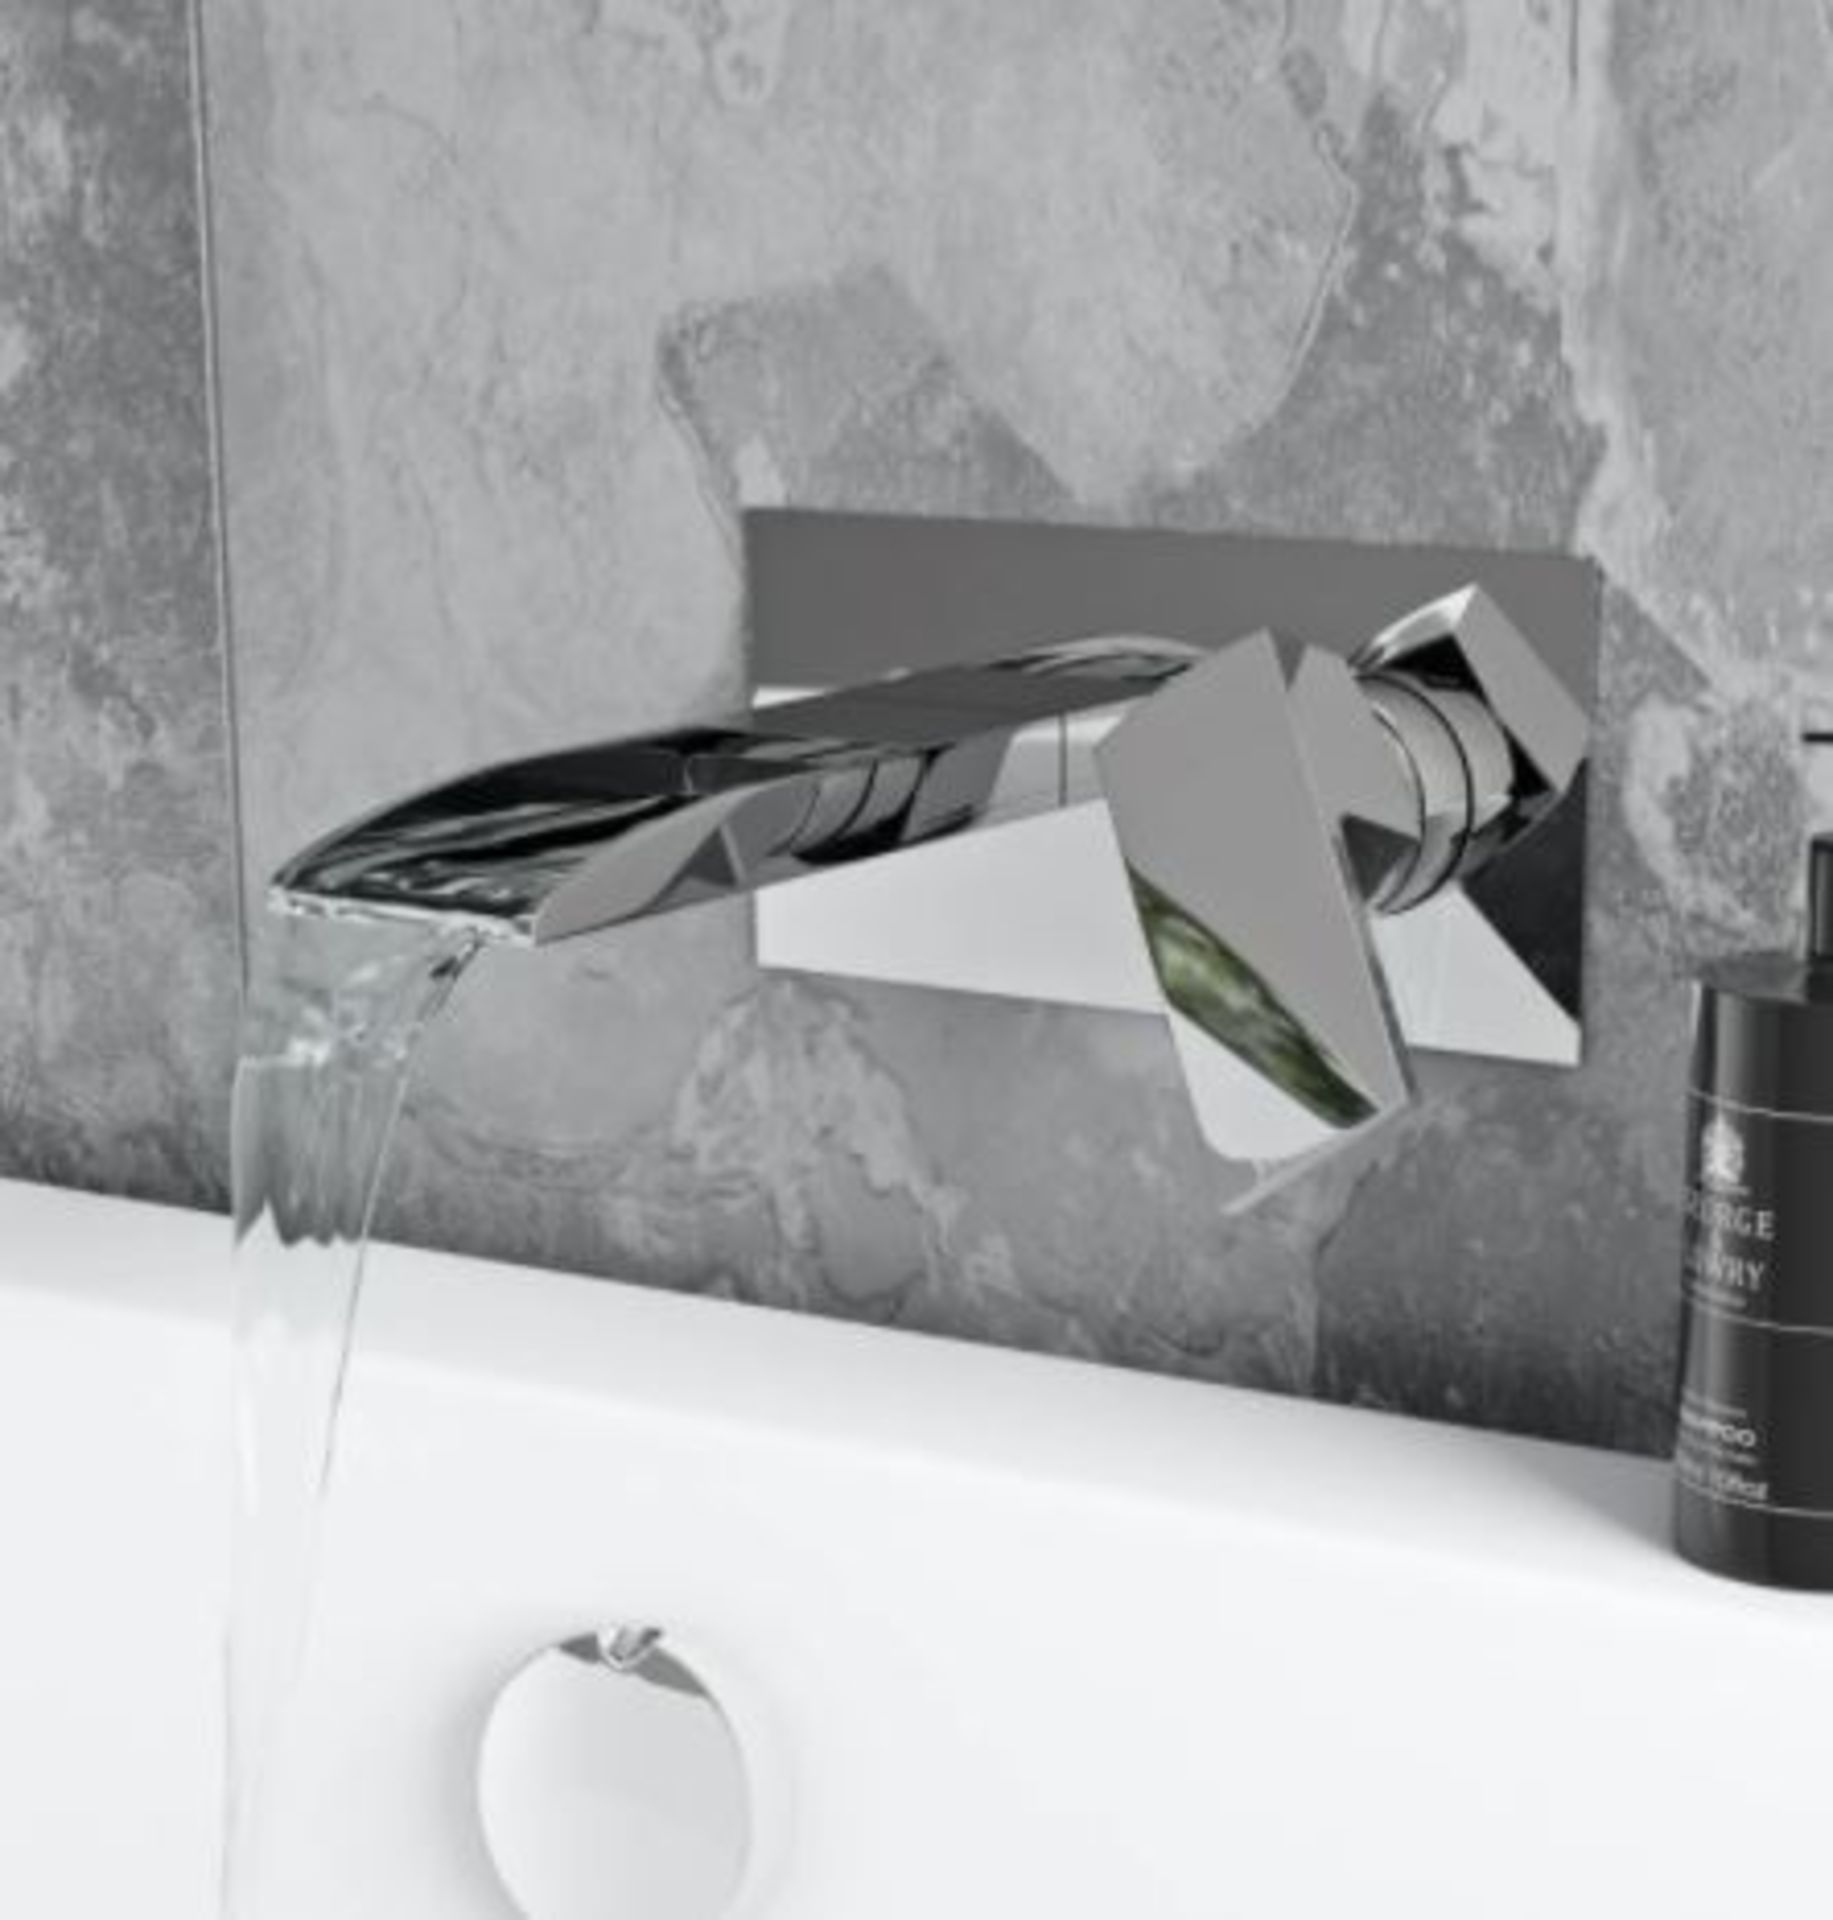 Mode Wall Mounted Square Bath Mixer Tap Brushed Nickel Finish - Image 2 of 5